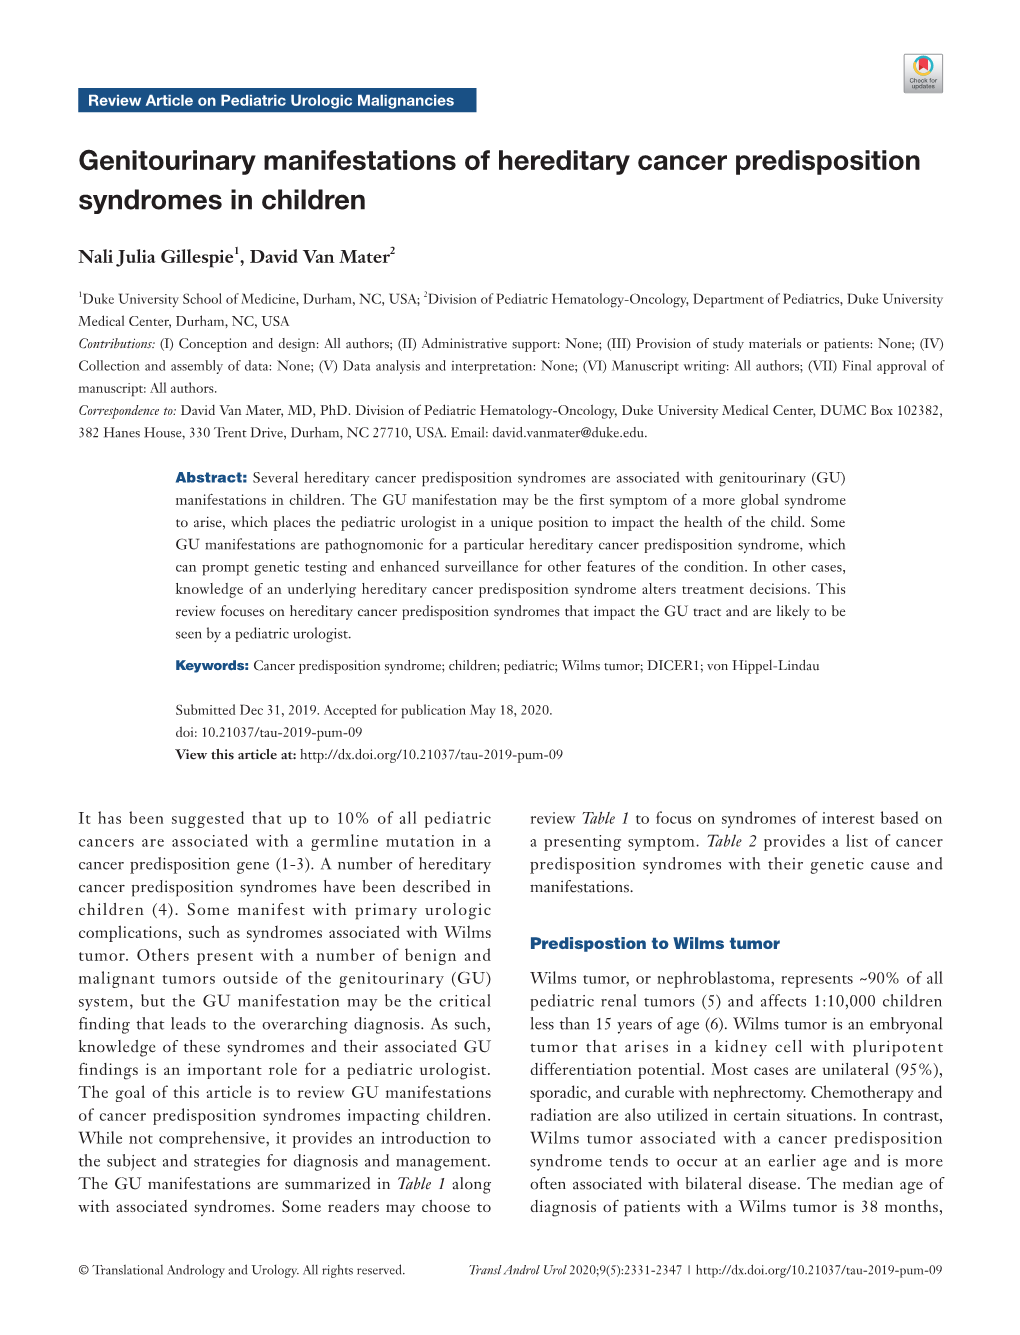 Genitourinary Manifestations of Hereditary Cancer Predisposition Syndromes in Children